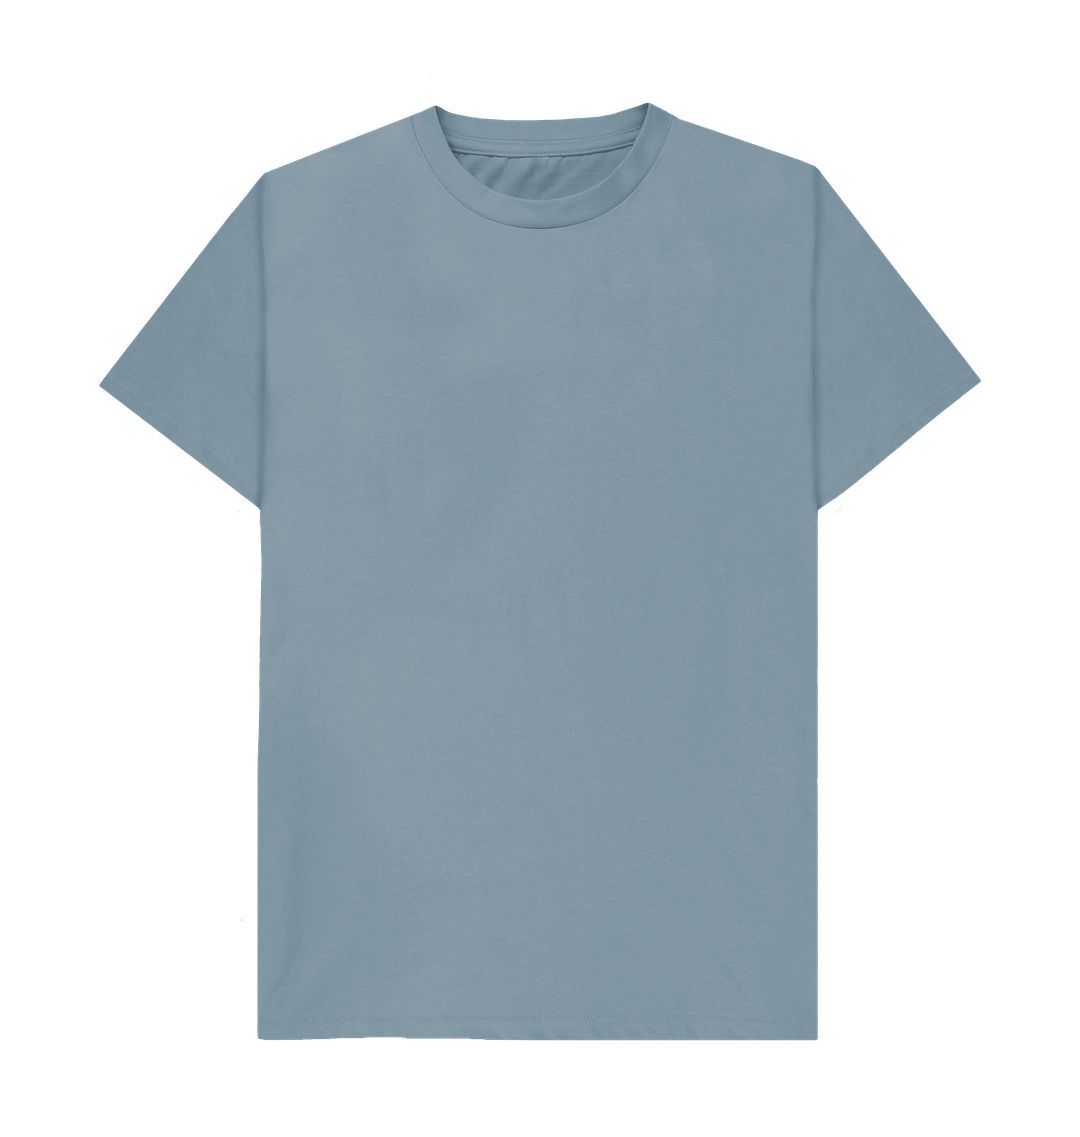 Stone Blue Simple Stuff fitted tee